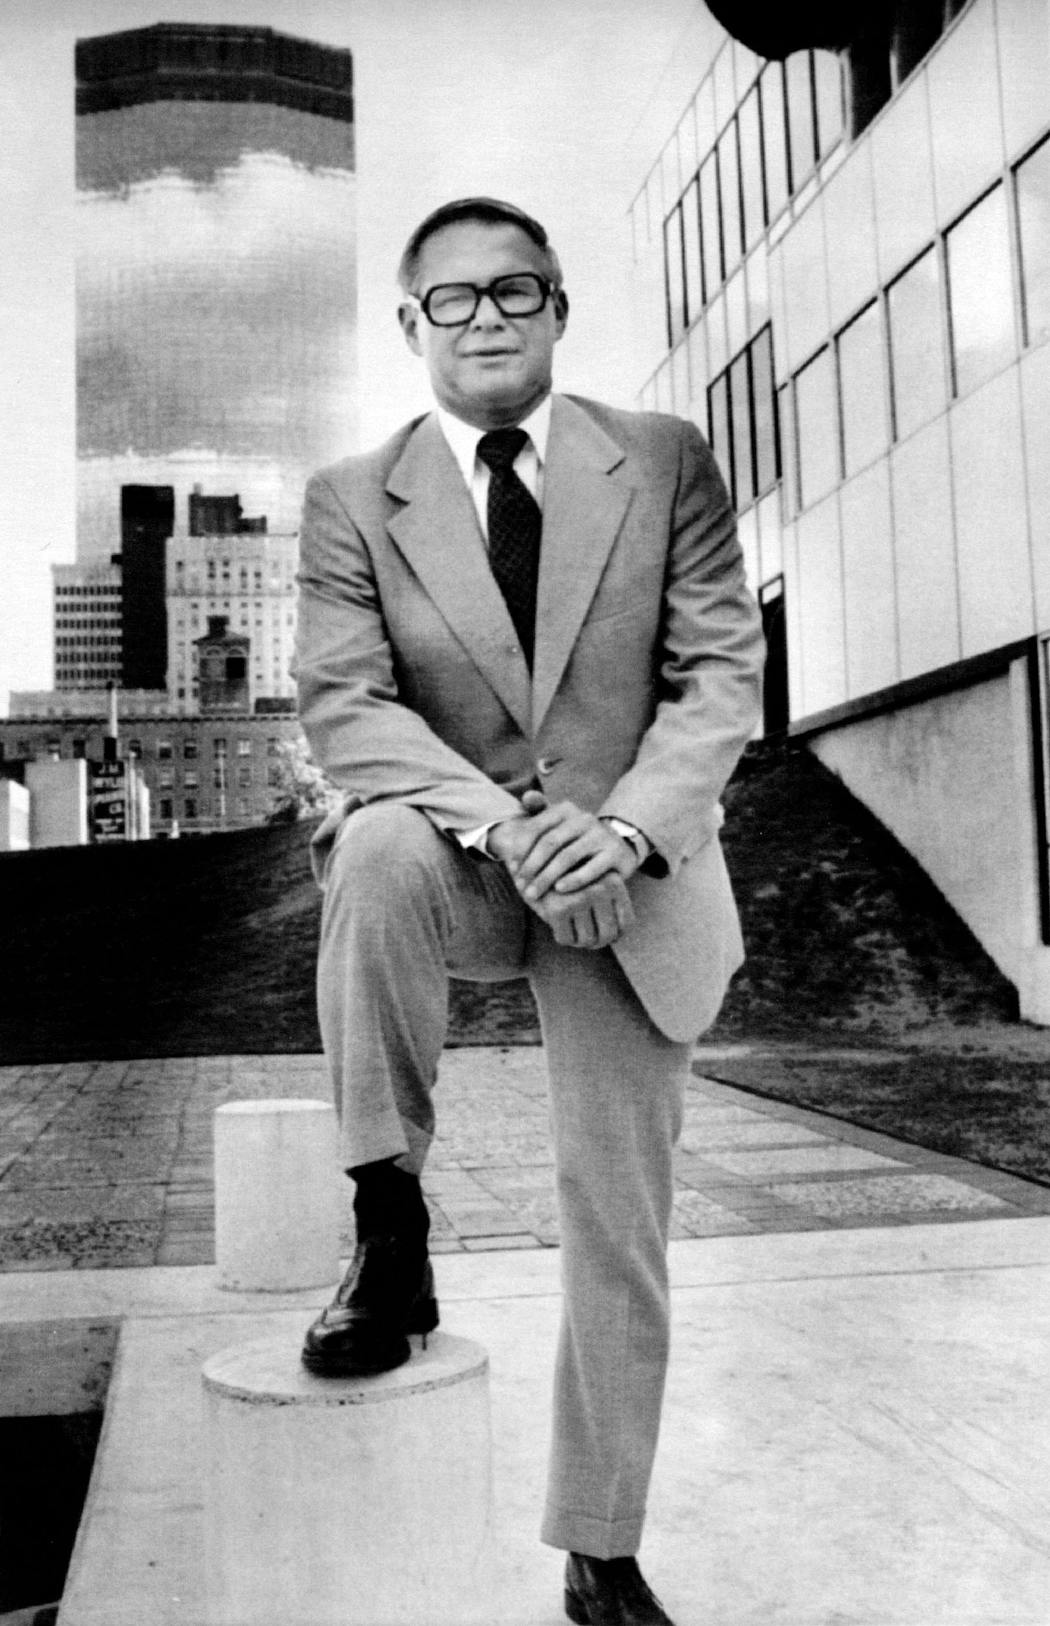 Graco CEO David Koch, who helped create the Five Percent Club, stood alongside Orchestra Hall in 1977. Private donations had been instrumental in the Hall's construction several years earlier.